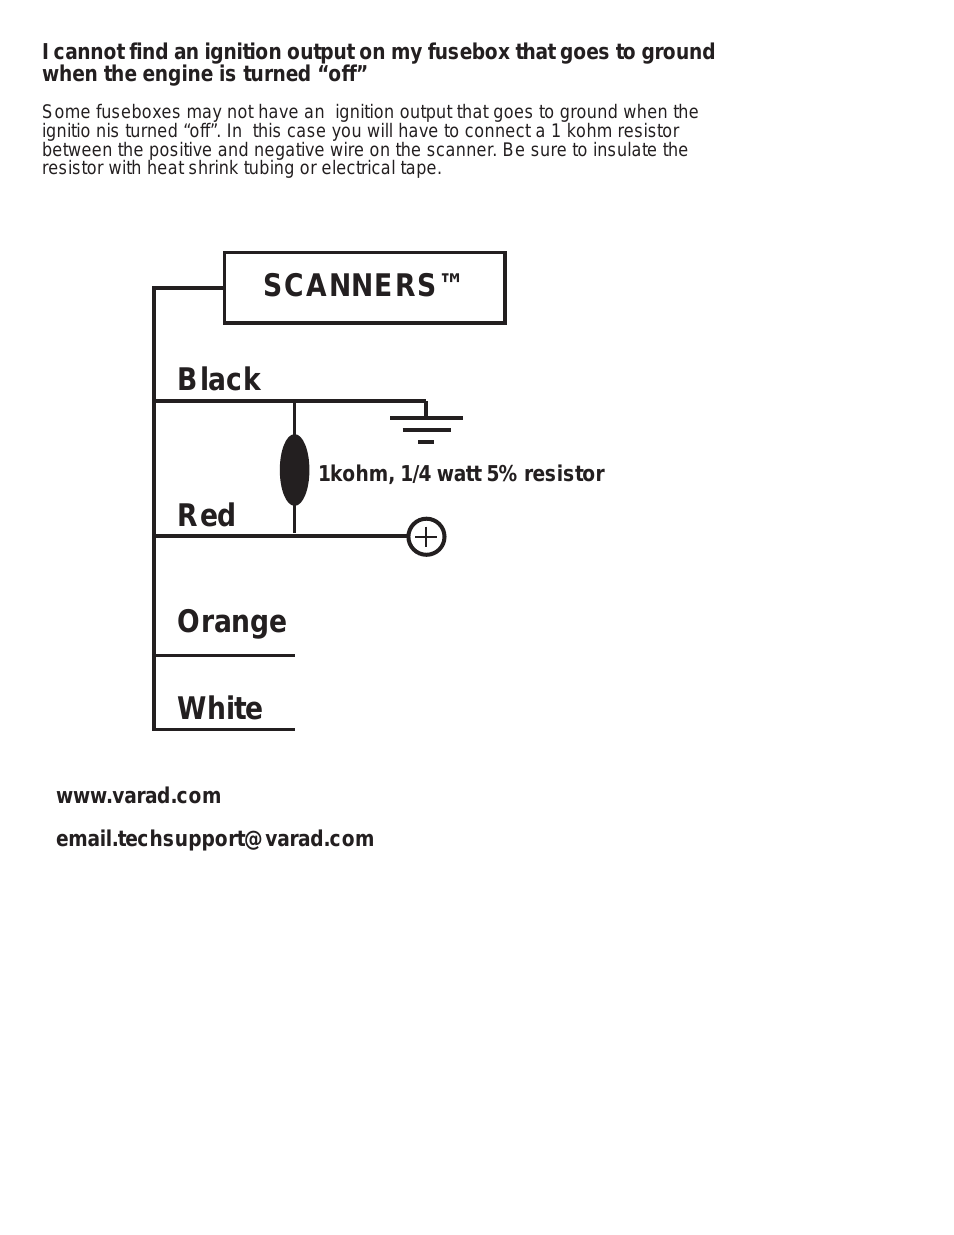 Scanners® - Scanners® Ignition Diagram